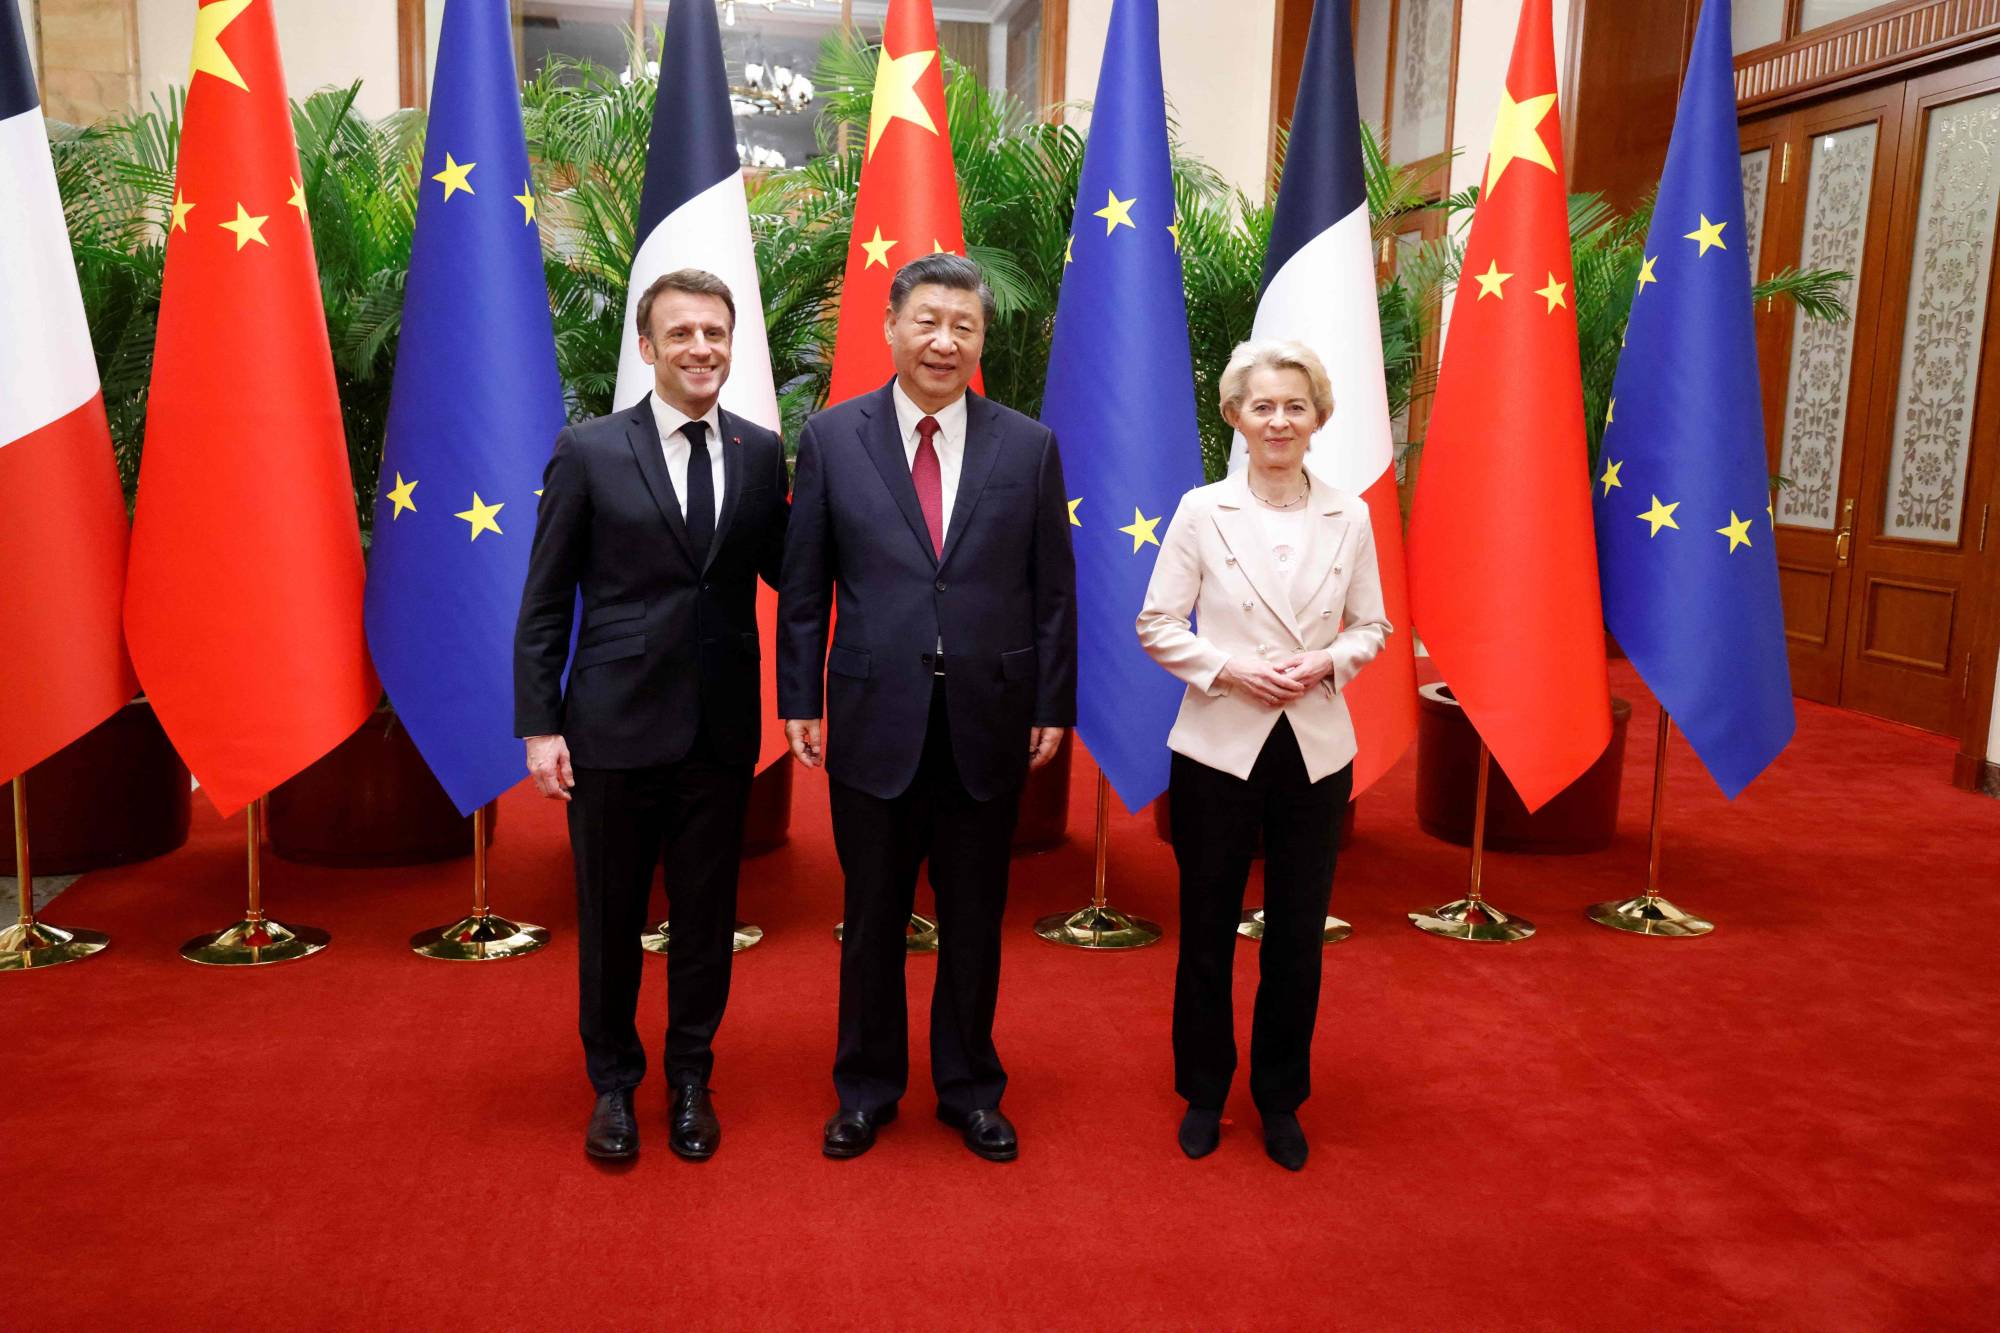 Chinese leader Xi Jinping, his French counterpart, Emmanuel Macron, and European Commission President Ursula von de Leyen meet in Beijing on April 6. | POOL / VIA AFP-JIJI